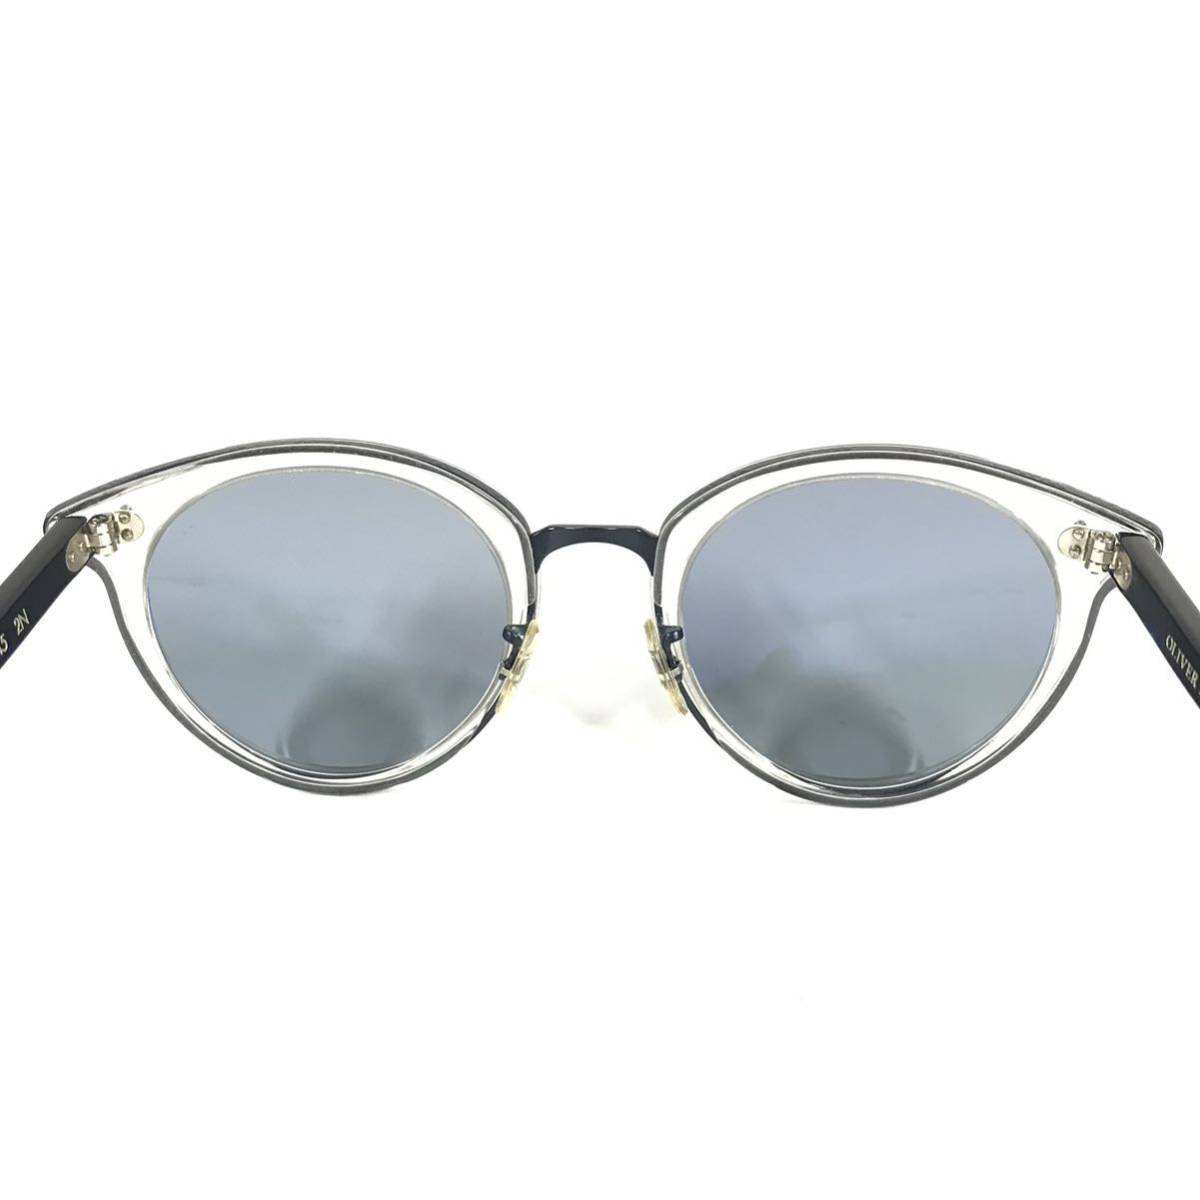 [ Oliver Peoples ] genuine article OLIVER PEOPLES sunglasses OV5323S clear × light blue series SPELMAN men's lady's case attaching postage 520 jpy 